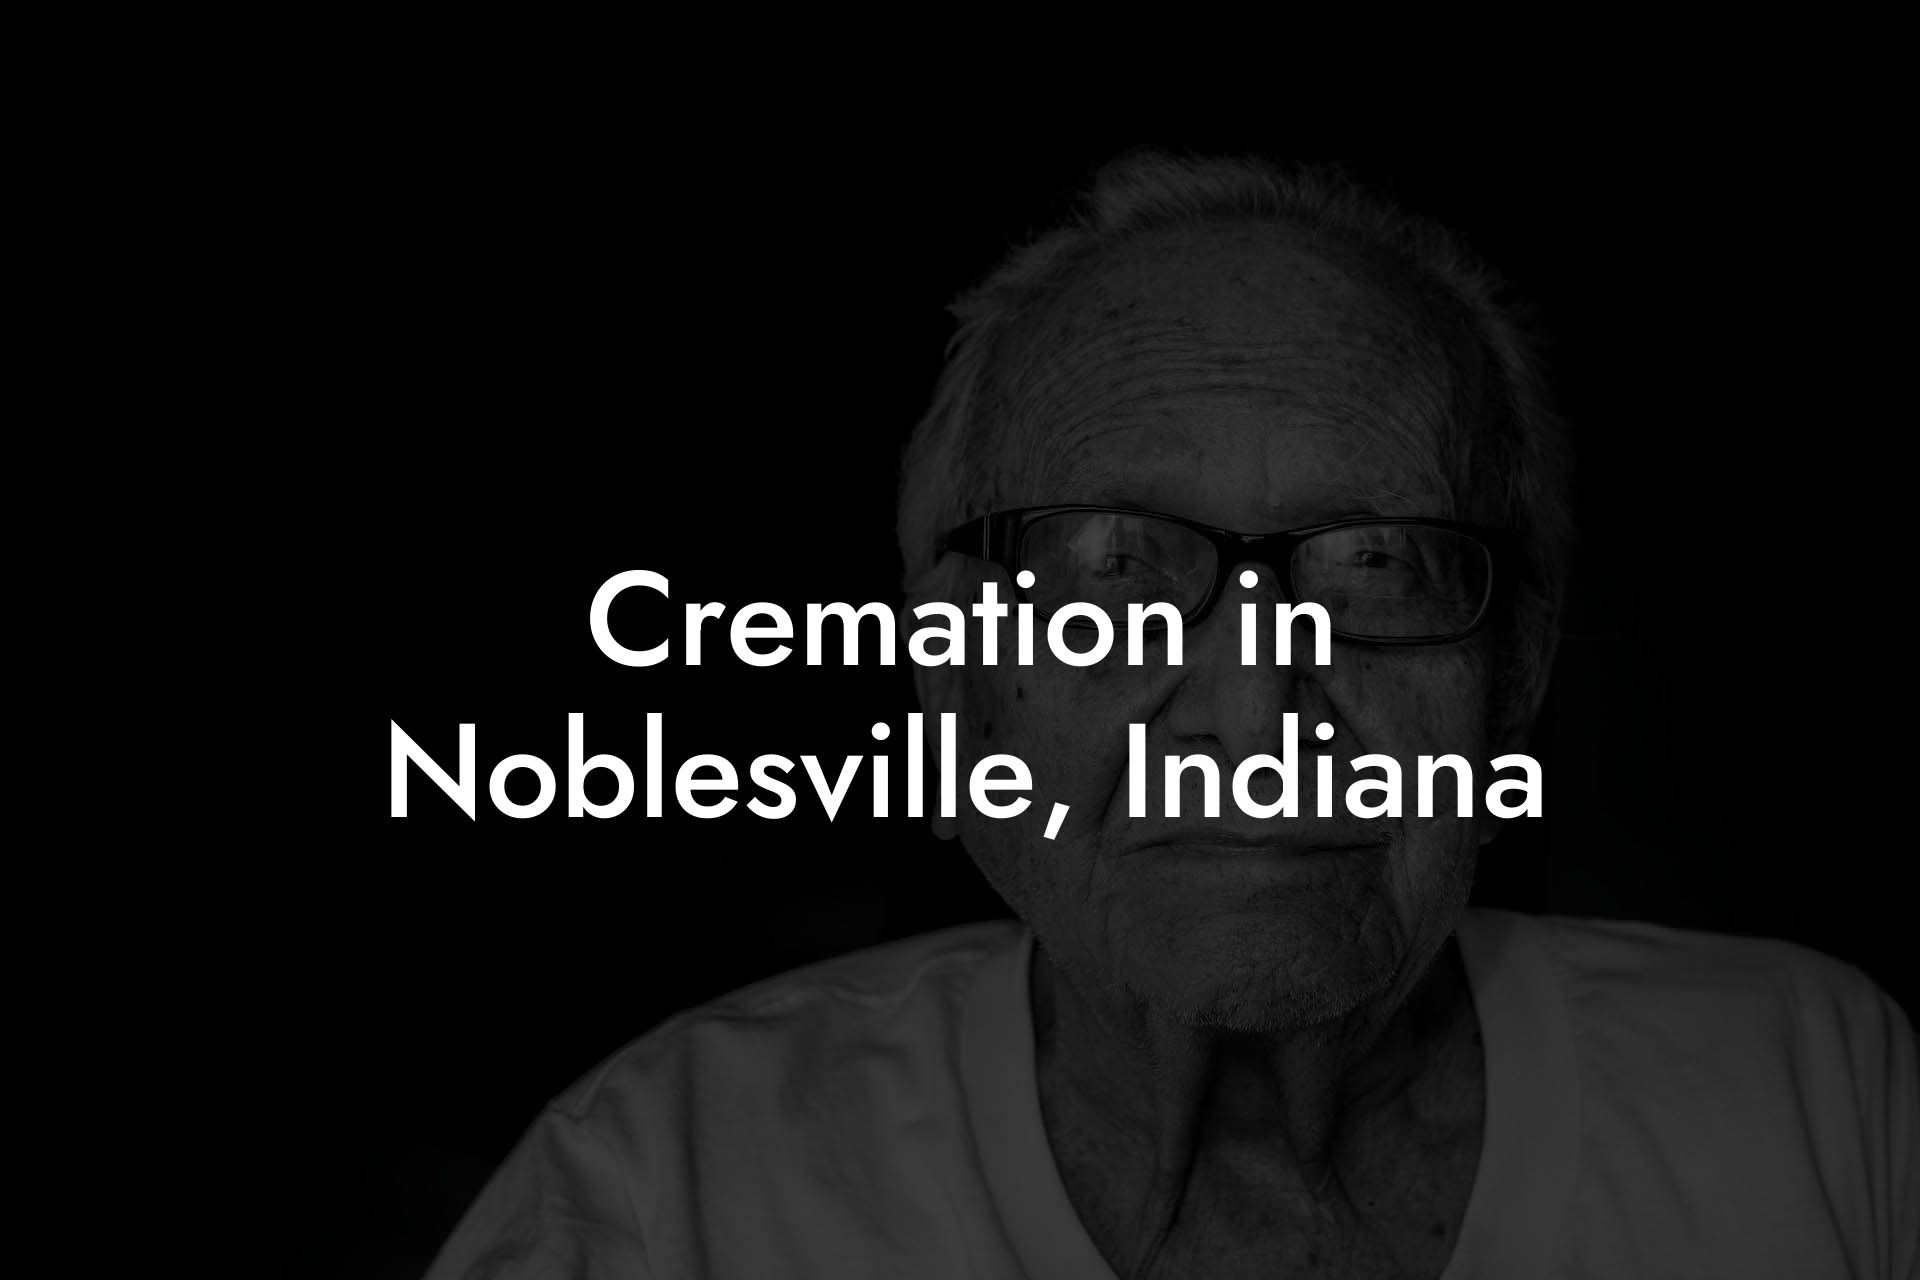 Cremation in Noblesville, Indiana